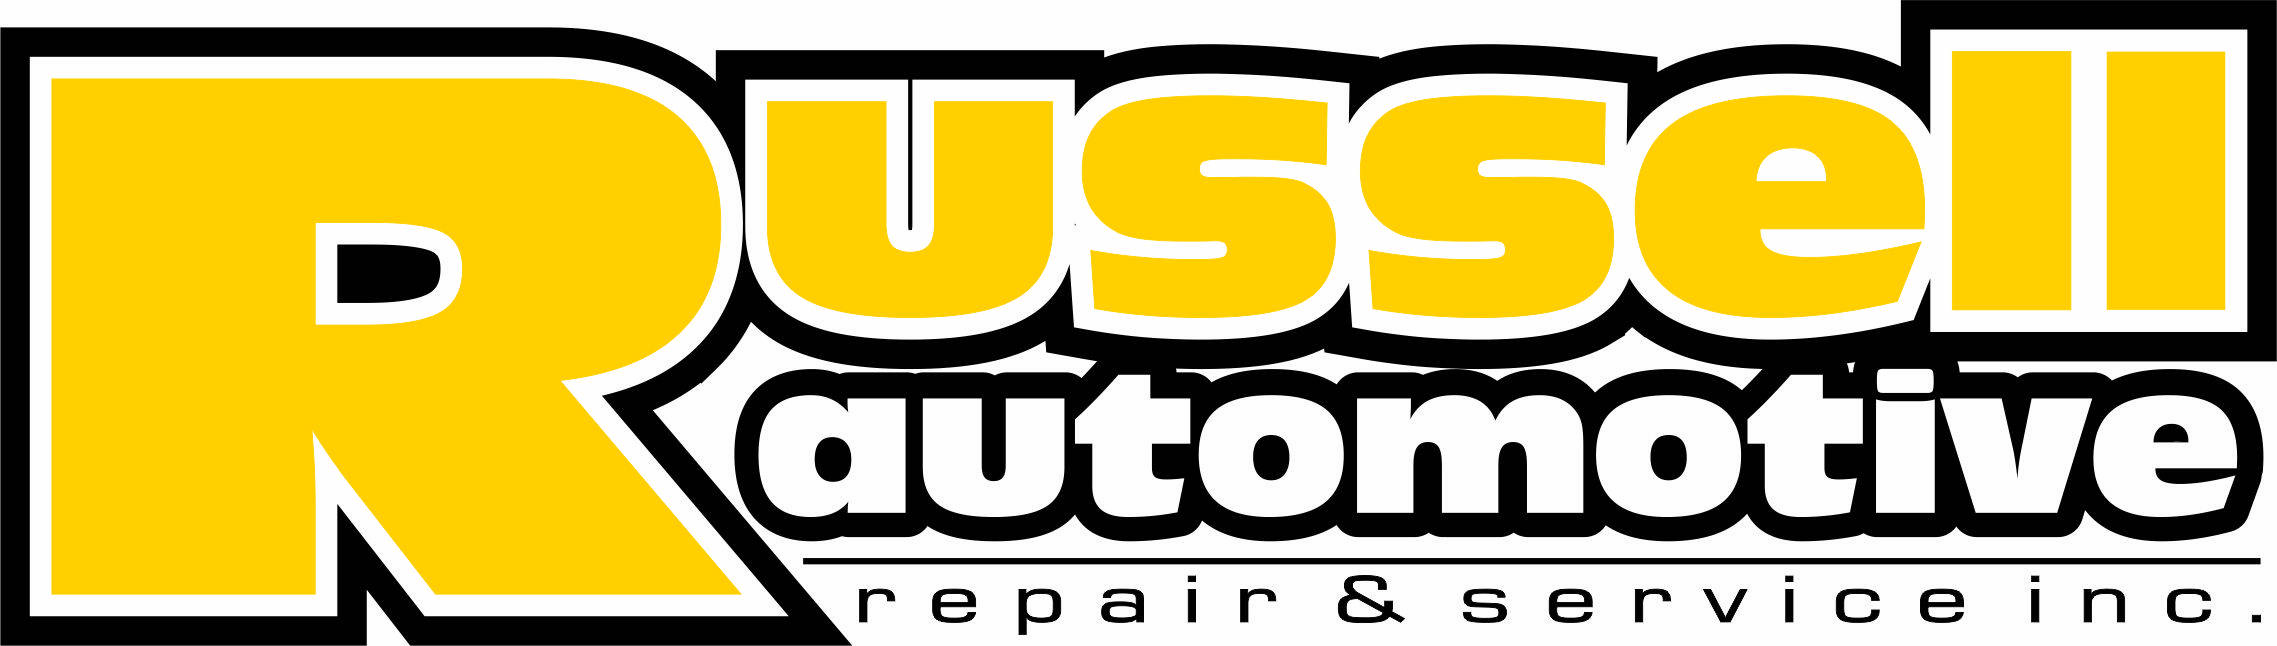 Russell Automotive Repair and Service